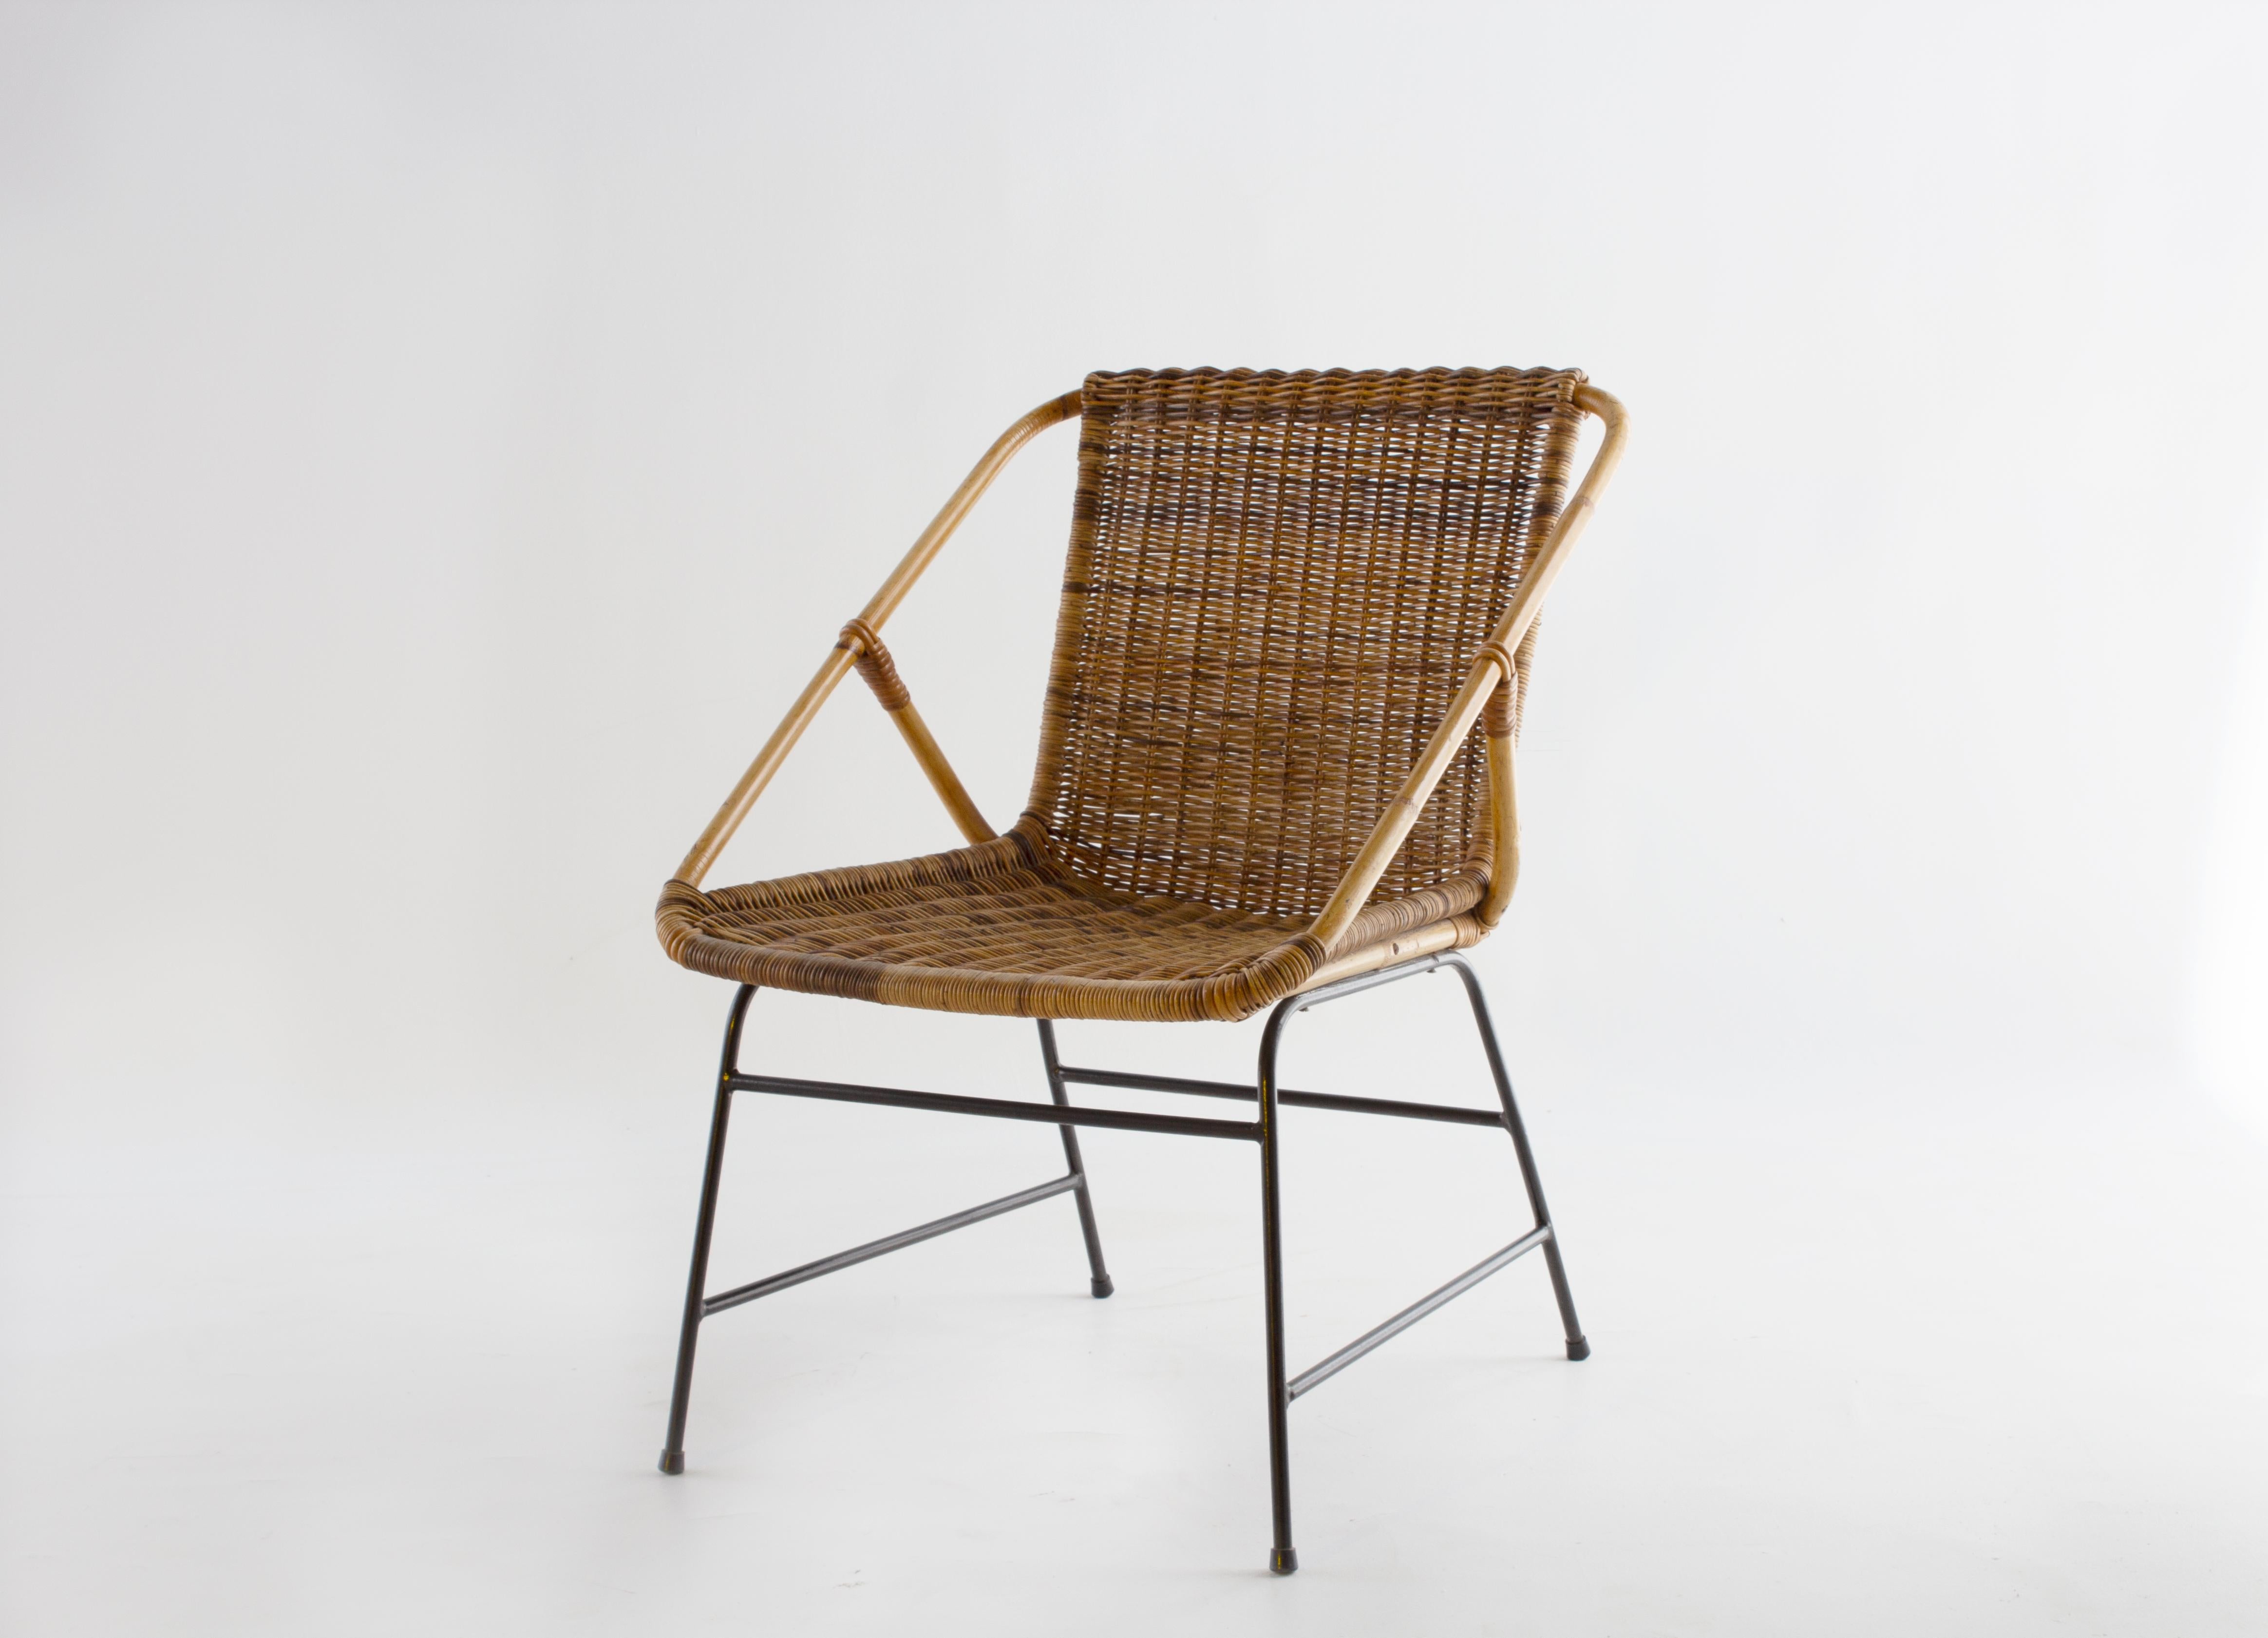 Vintage Swedish woven club chair, circa 1960.

This piece is a part of Brendan Bass’s one-of-a-kind collection, Le Monde. French for “The World”, the Le Monde collection is made up of rare and hard to find pieces curated by Brendan from estate